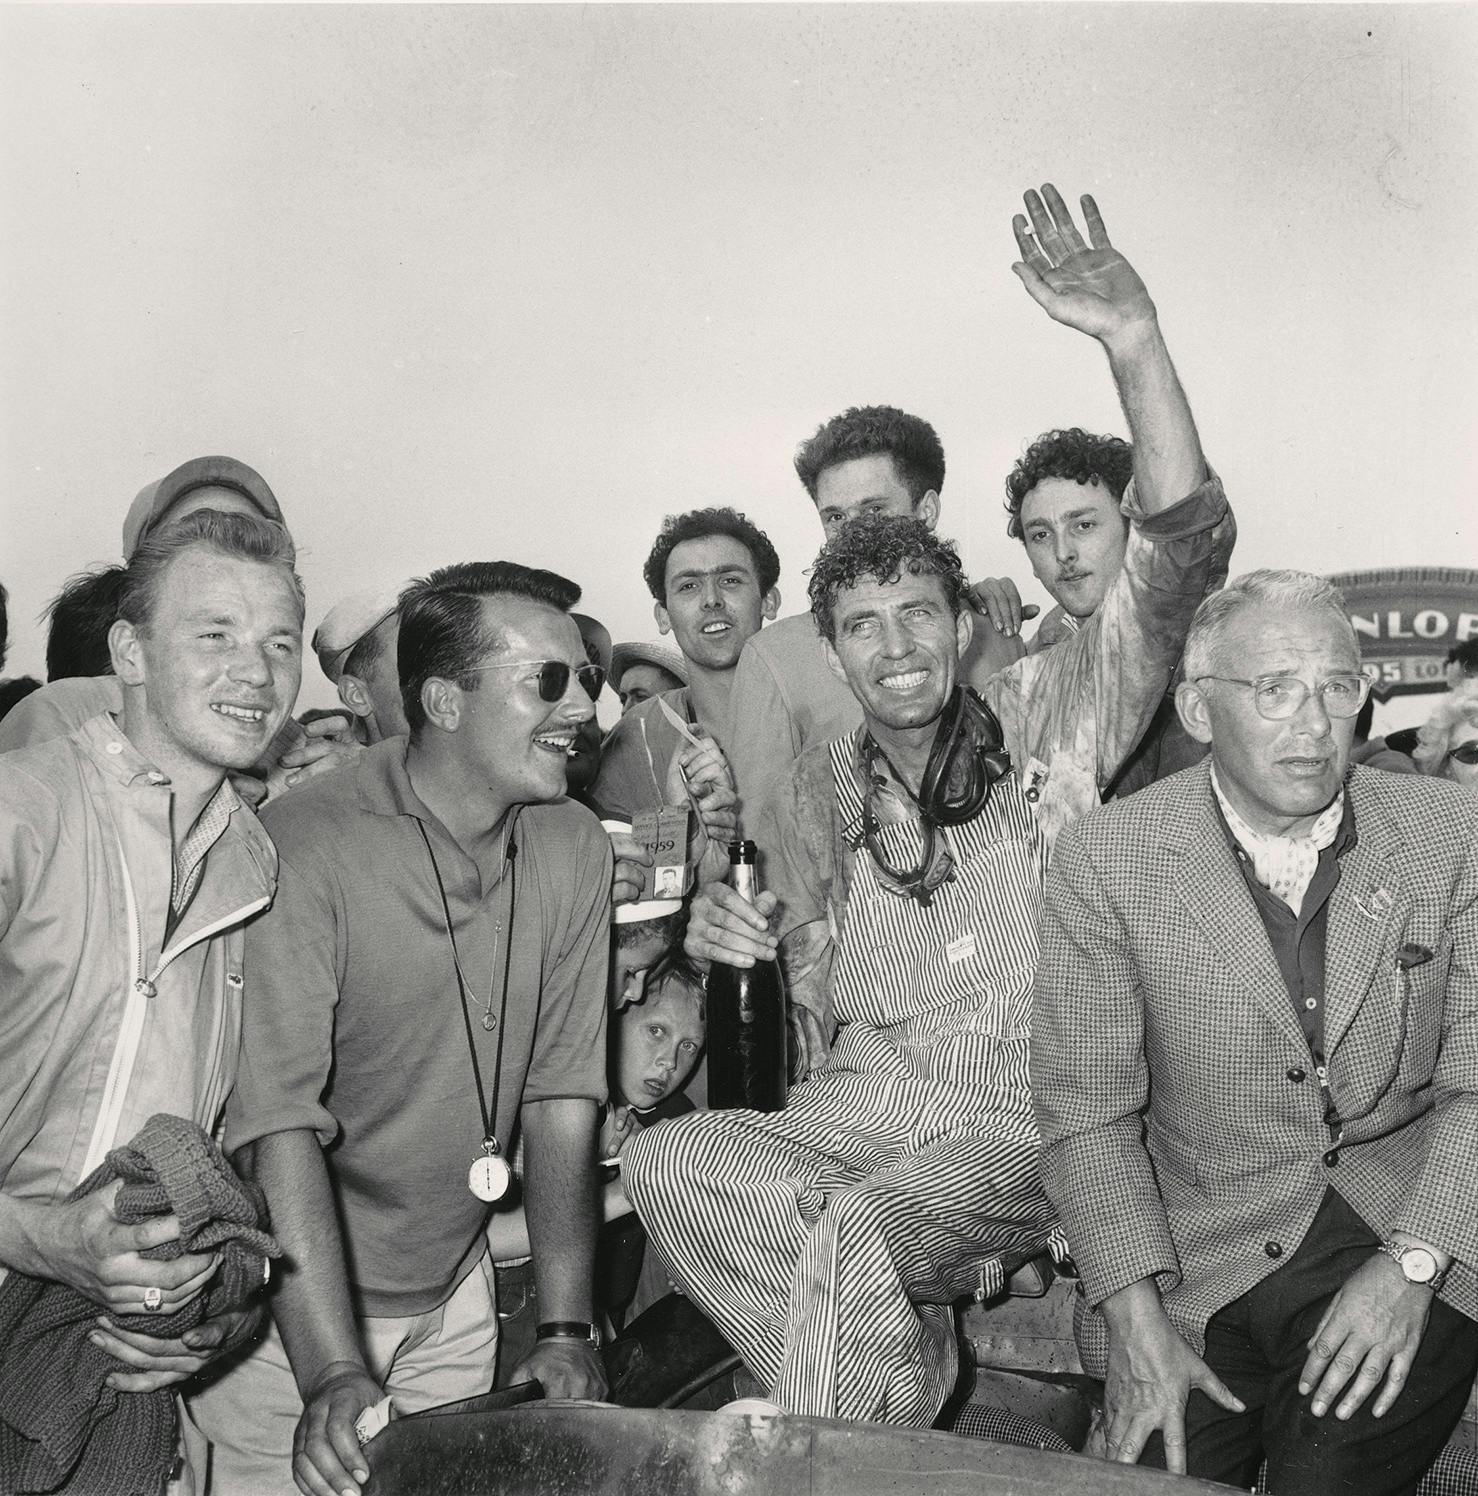 Race car driver Carroll Shelby, of Dallas, is surrounded by fans after winning the 24-hours endurance race at Le Mans, France, on June 21, 1959. He and teammate Roy Salvadori, not shown, drove their Aston Martin to victory at an average speed of 181 kmh.